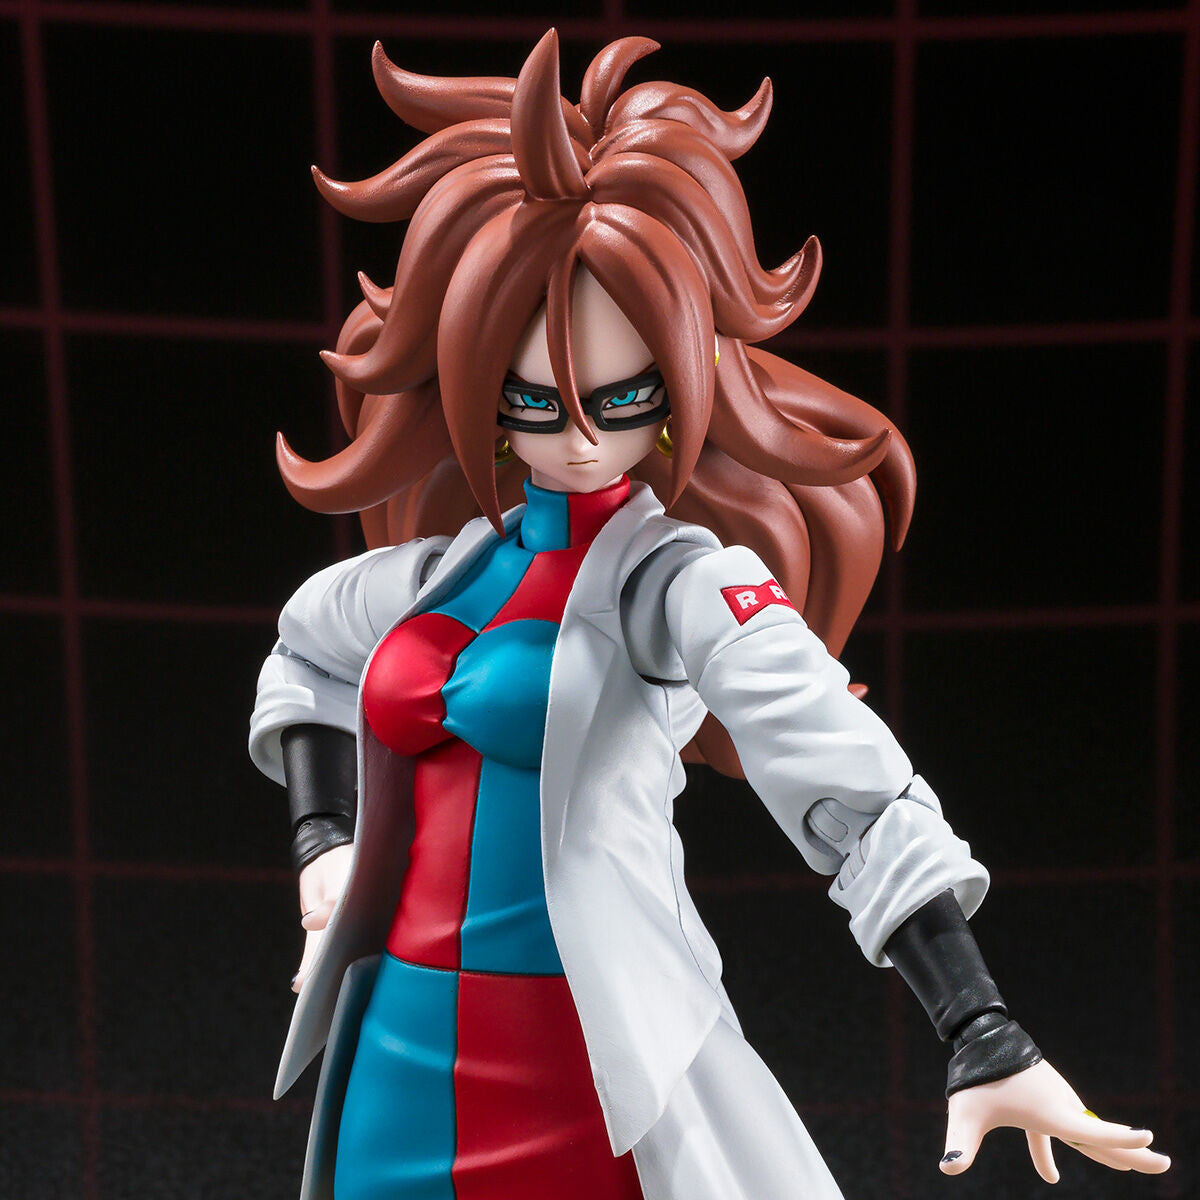 SHF Android 21 Lab Coat for Sale